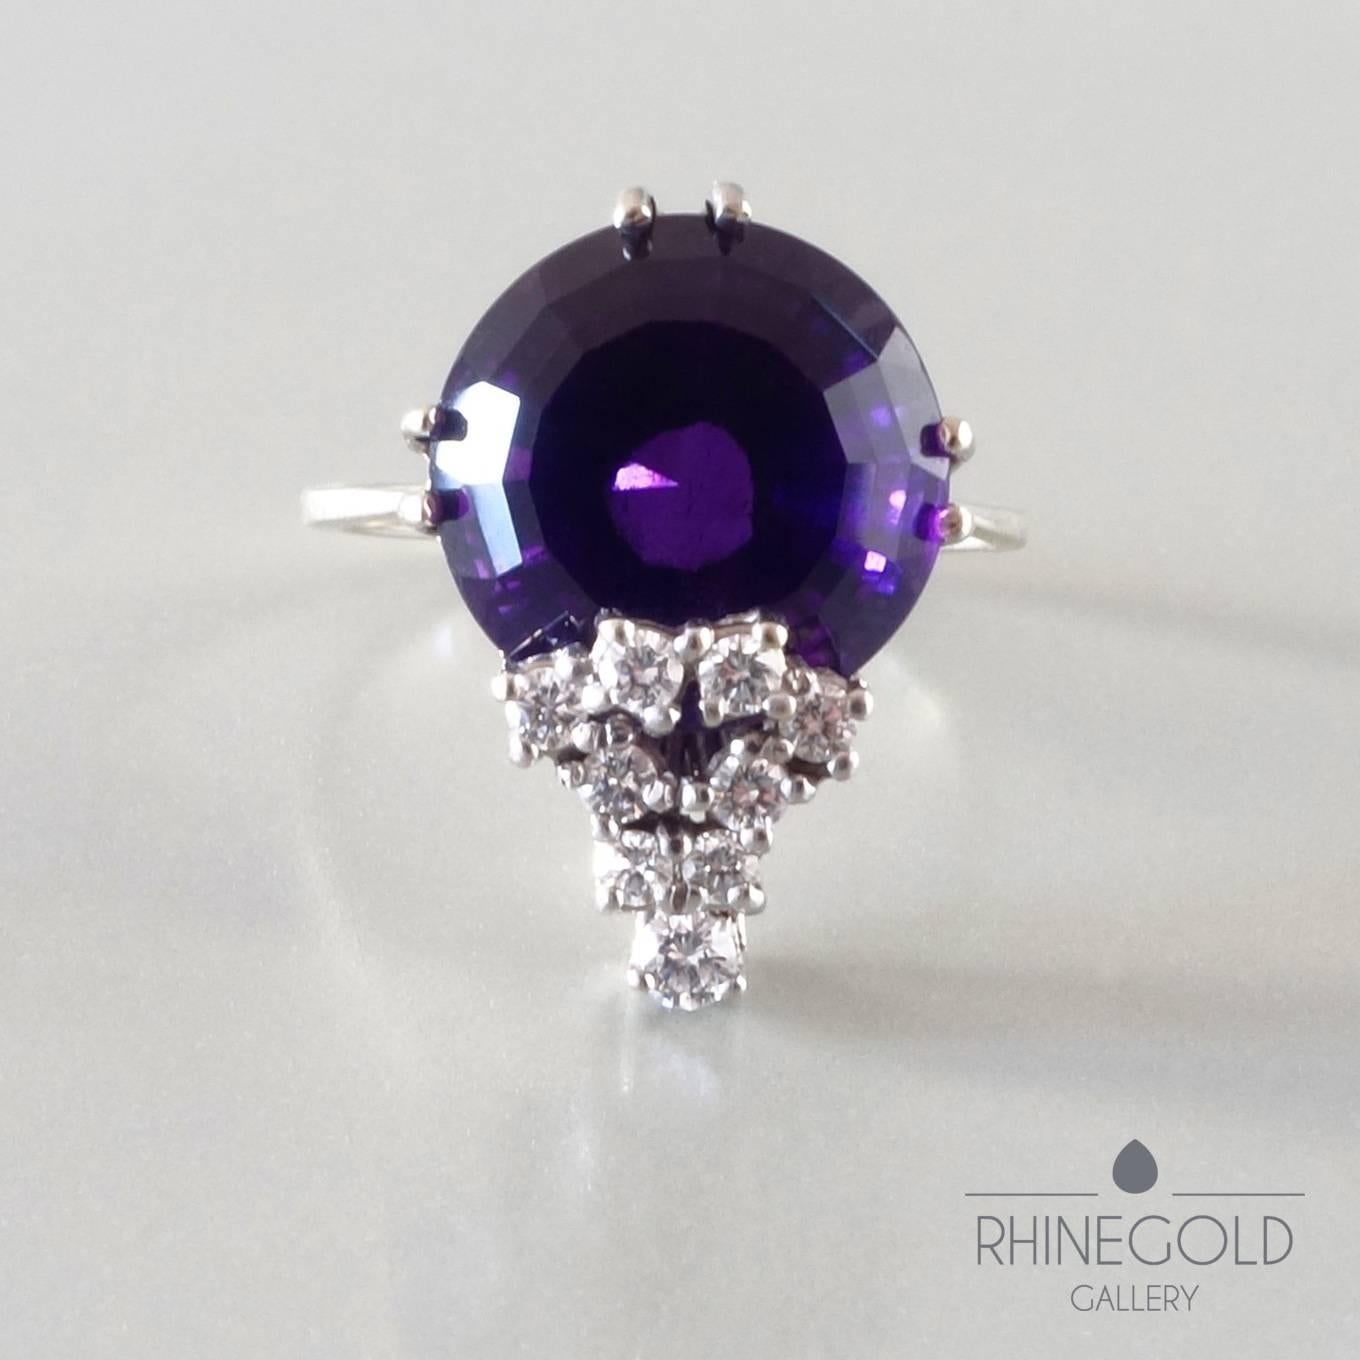 1970s Modernist Diamond Amethyst White Gold Cocktail Ring 
14k white gold, amethyst (approx. 6 ct.), brilliant cut diamonds (top wesselton, vvs-vs, ca. 0.3 ct. in total)
Ring head 1.9 cm by 1.35 cm (approx. 3/4” by 1/2”); Ø of amethyst 12
Ring size: